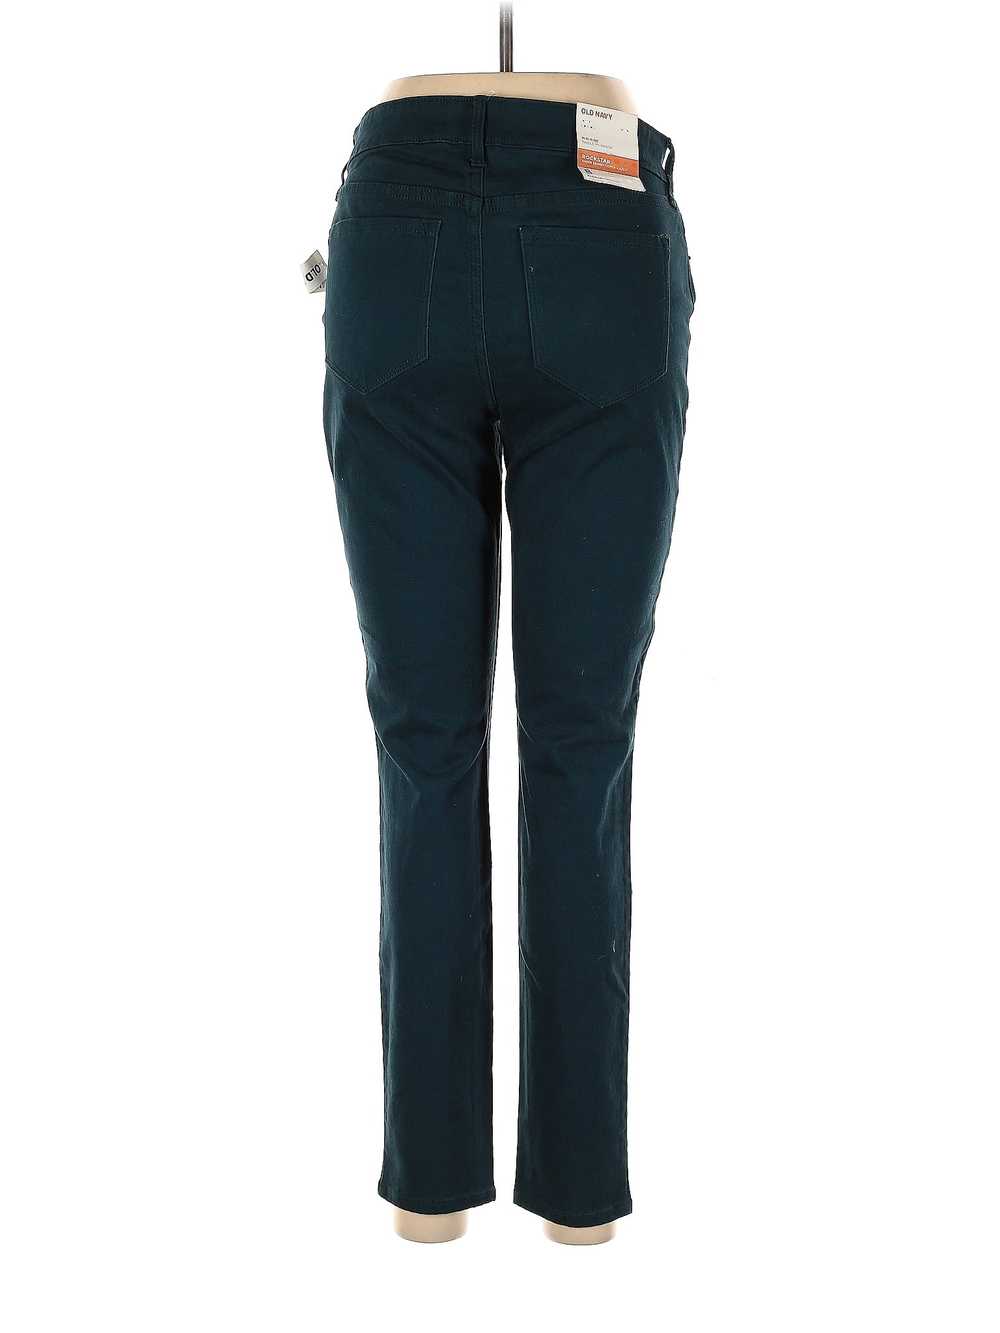 Old Navy Women Green Jeans 8 - image 2